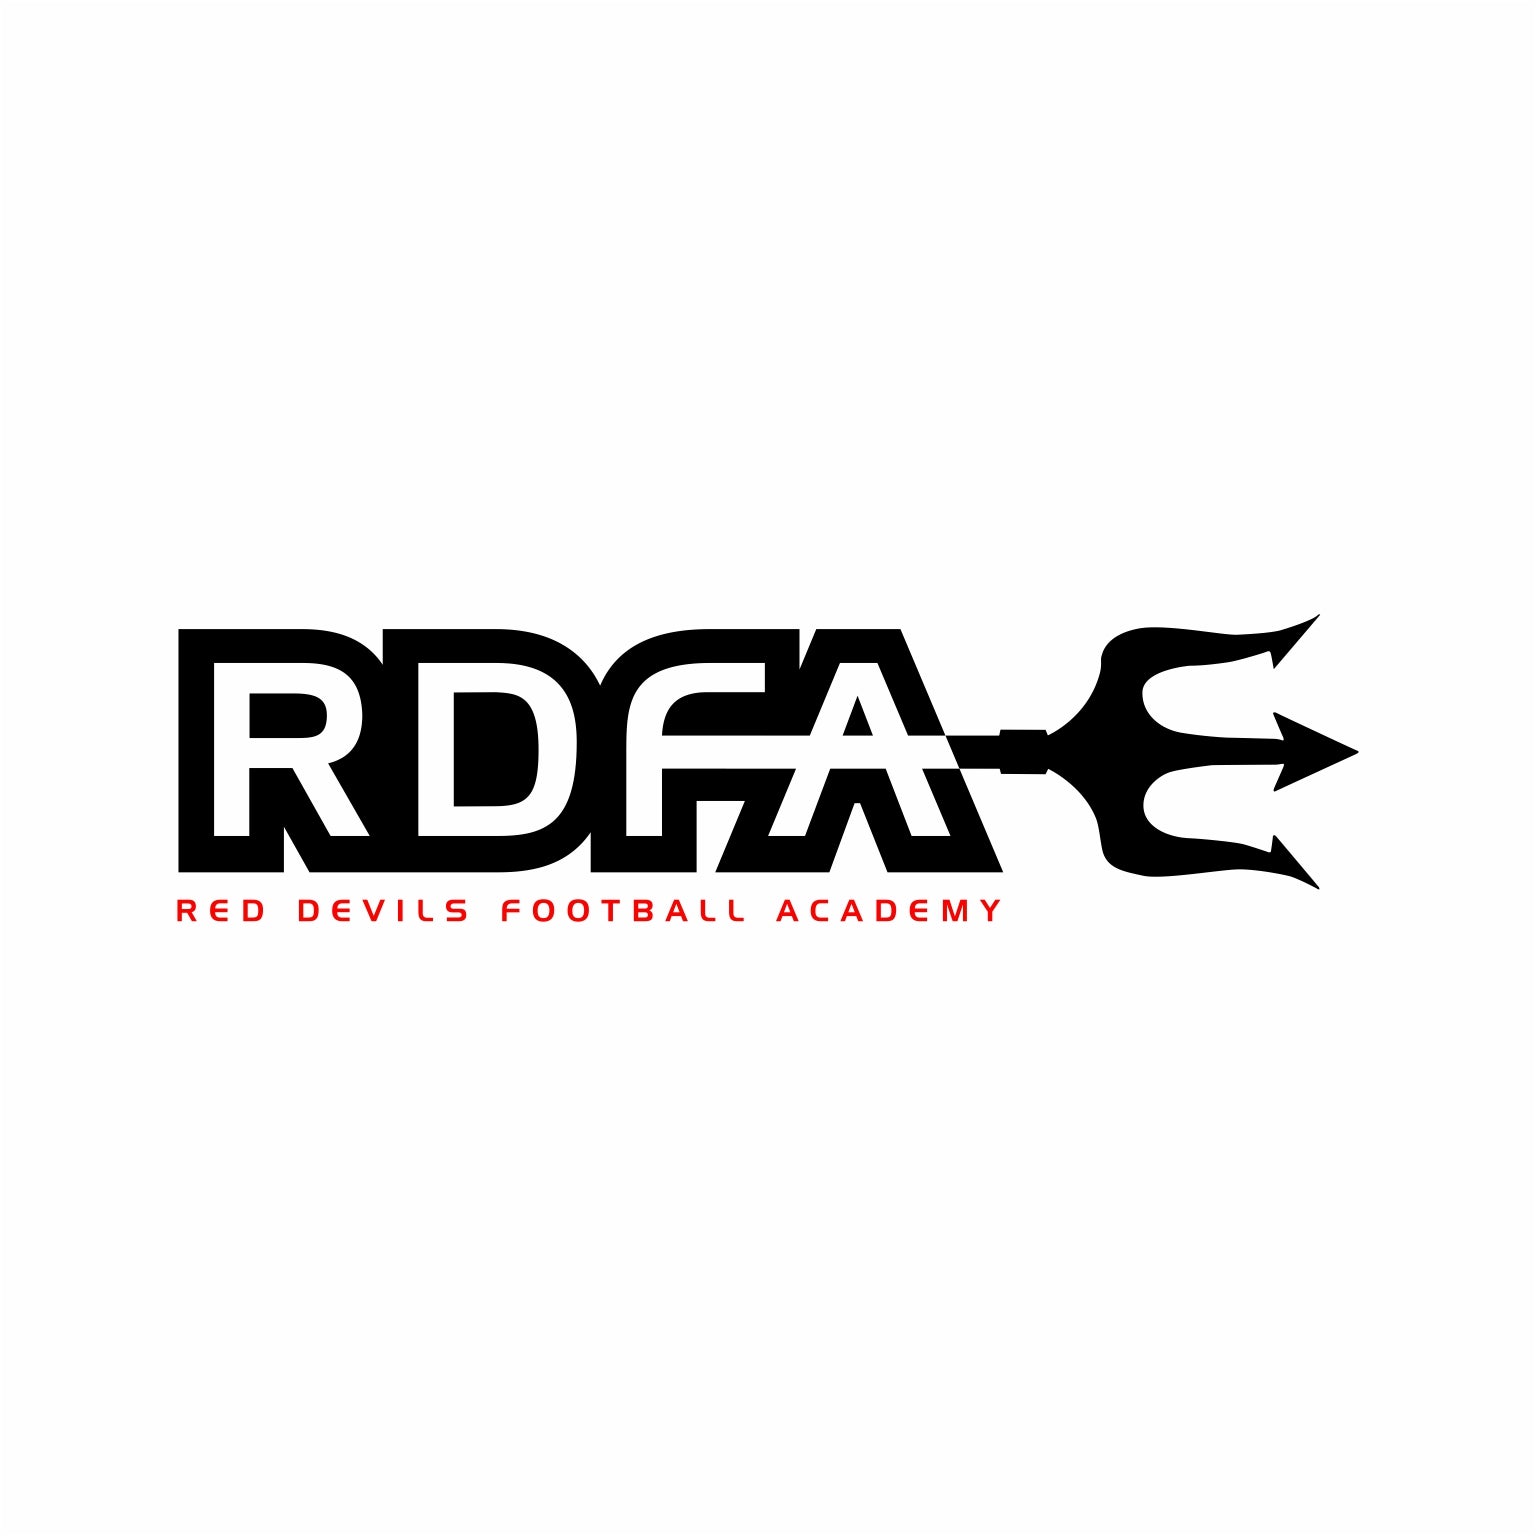 Red Devils Football Academy